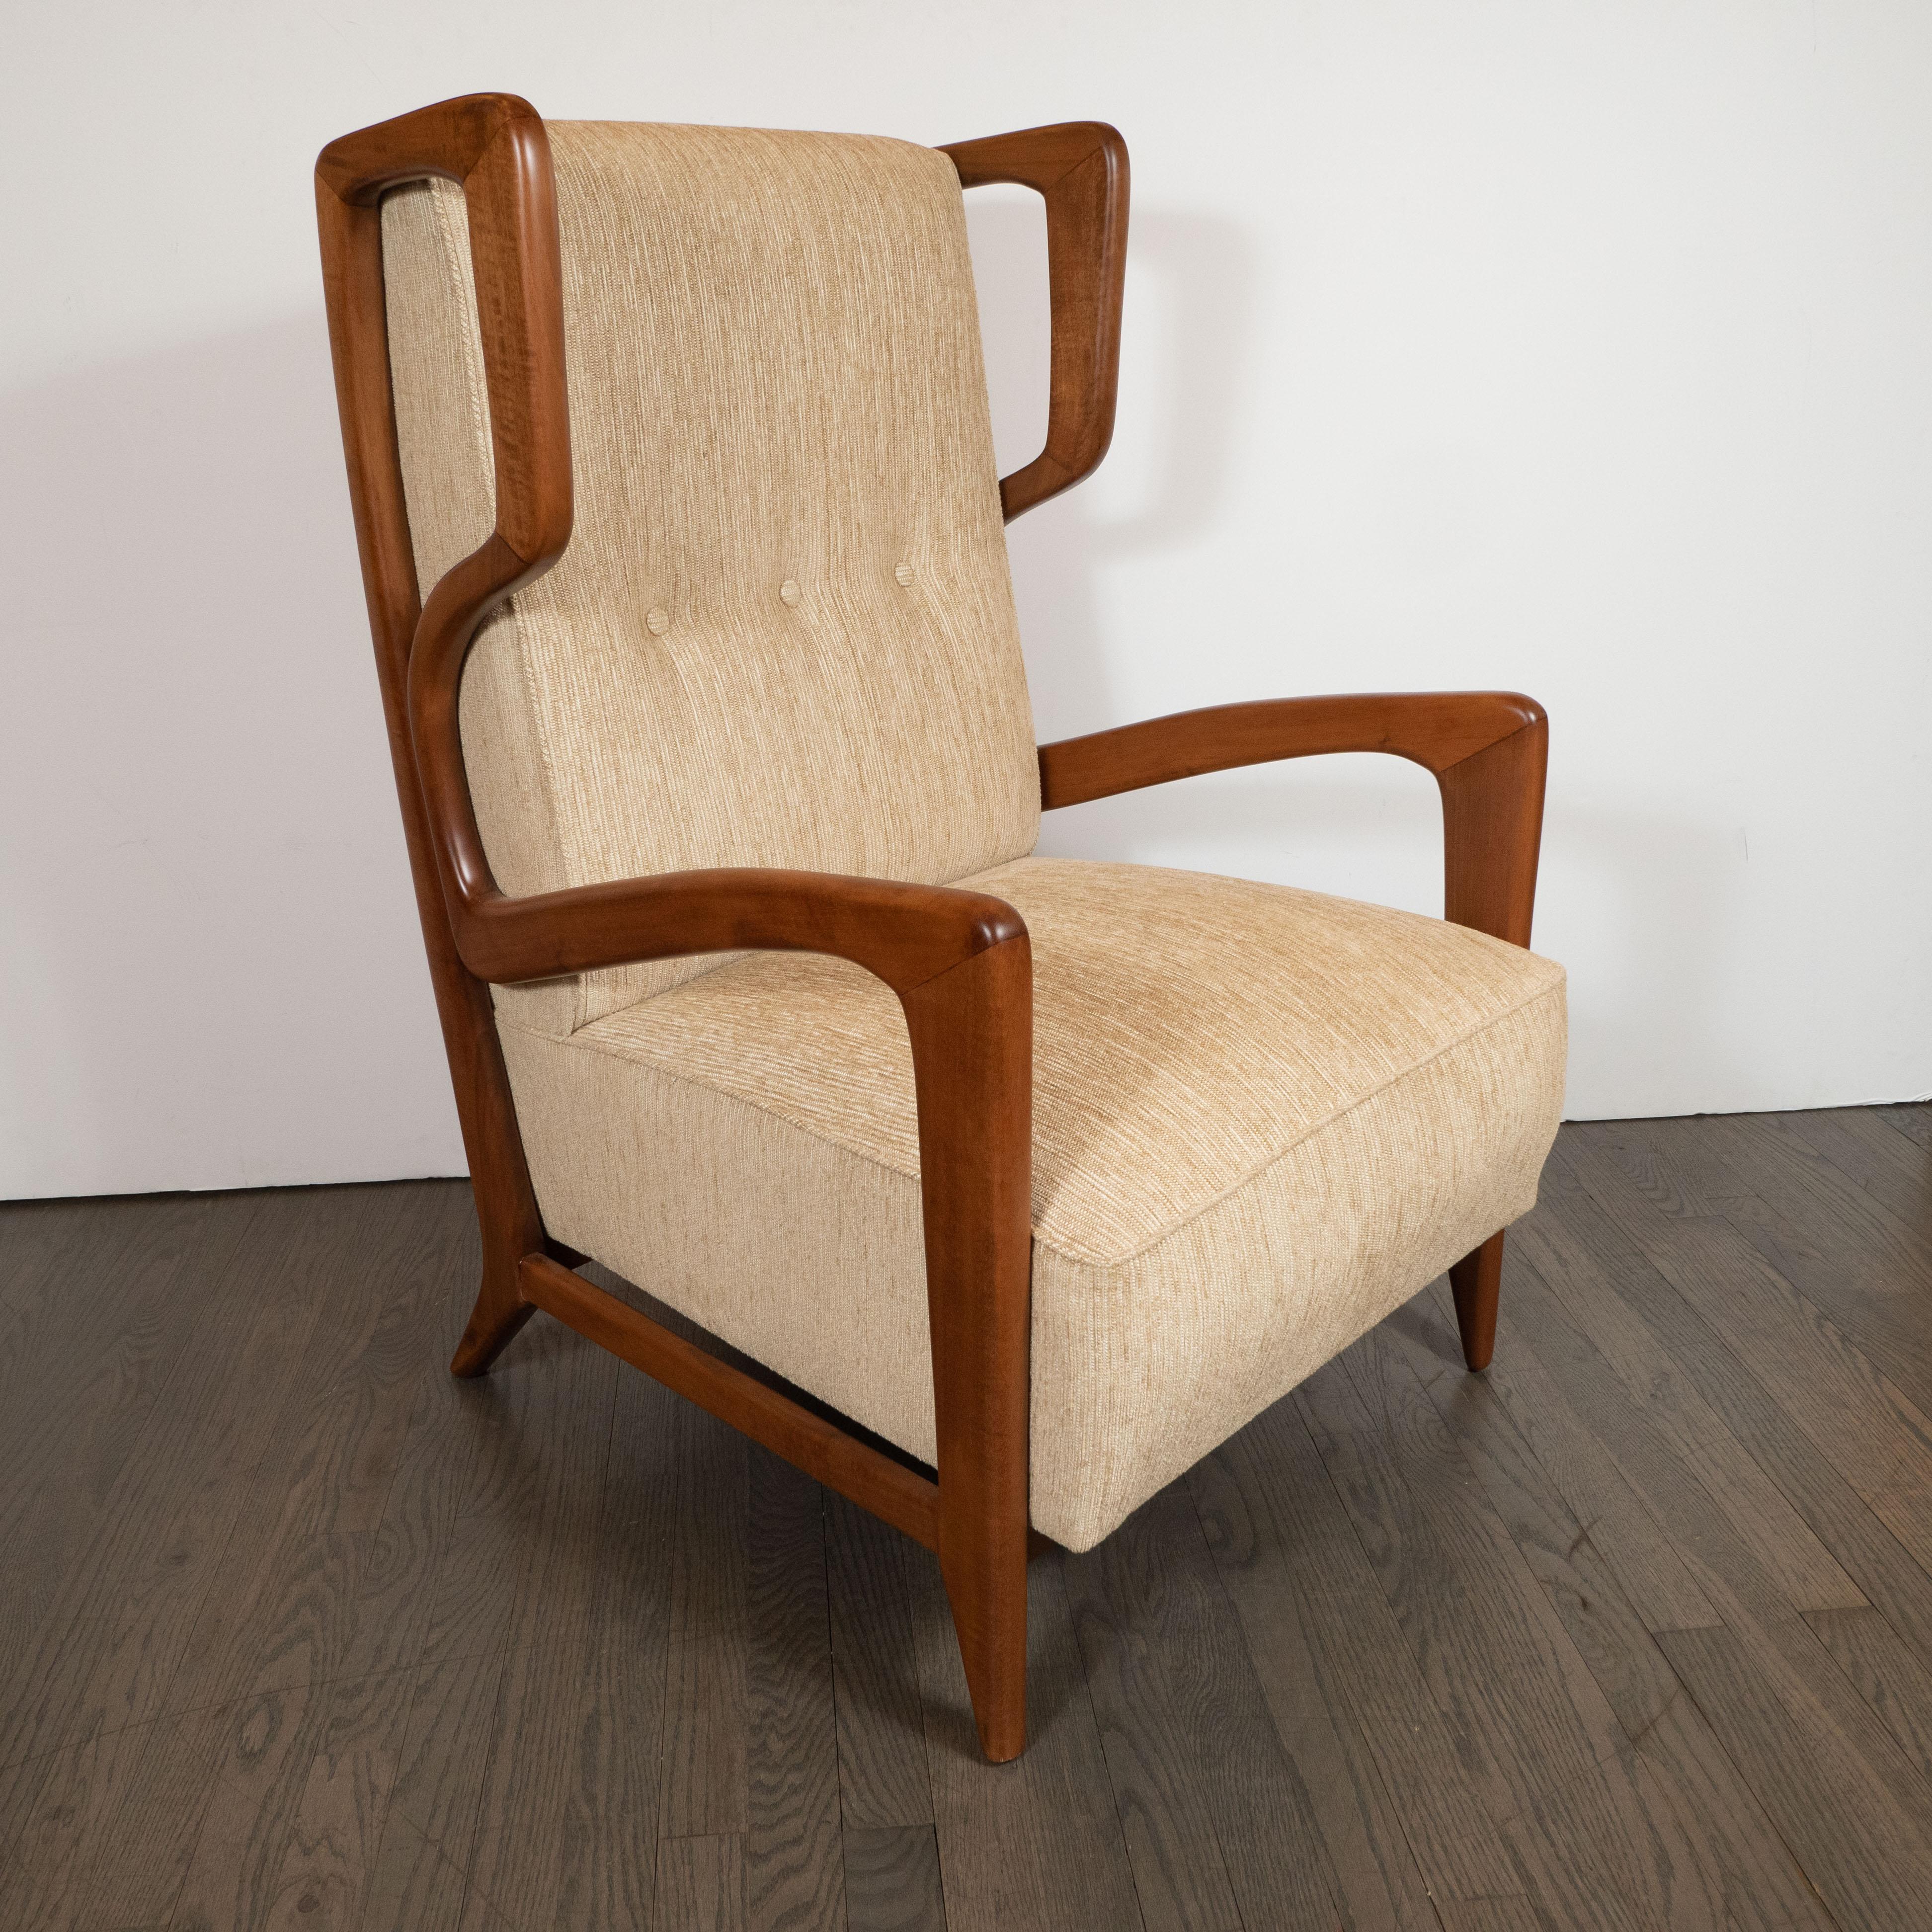 This stunning and sculptural pair of Mid-Century Modern lounge chairs were realized in Italy, circa 1950. They feature high button backs and a wonderfully unusual and highly sculptural frame in handrubbbed walnut- offering a wealth of curvilinear